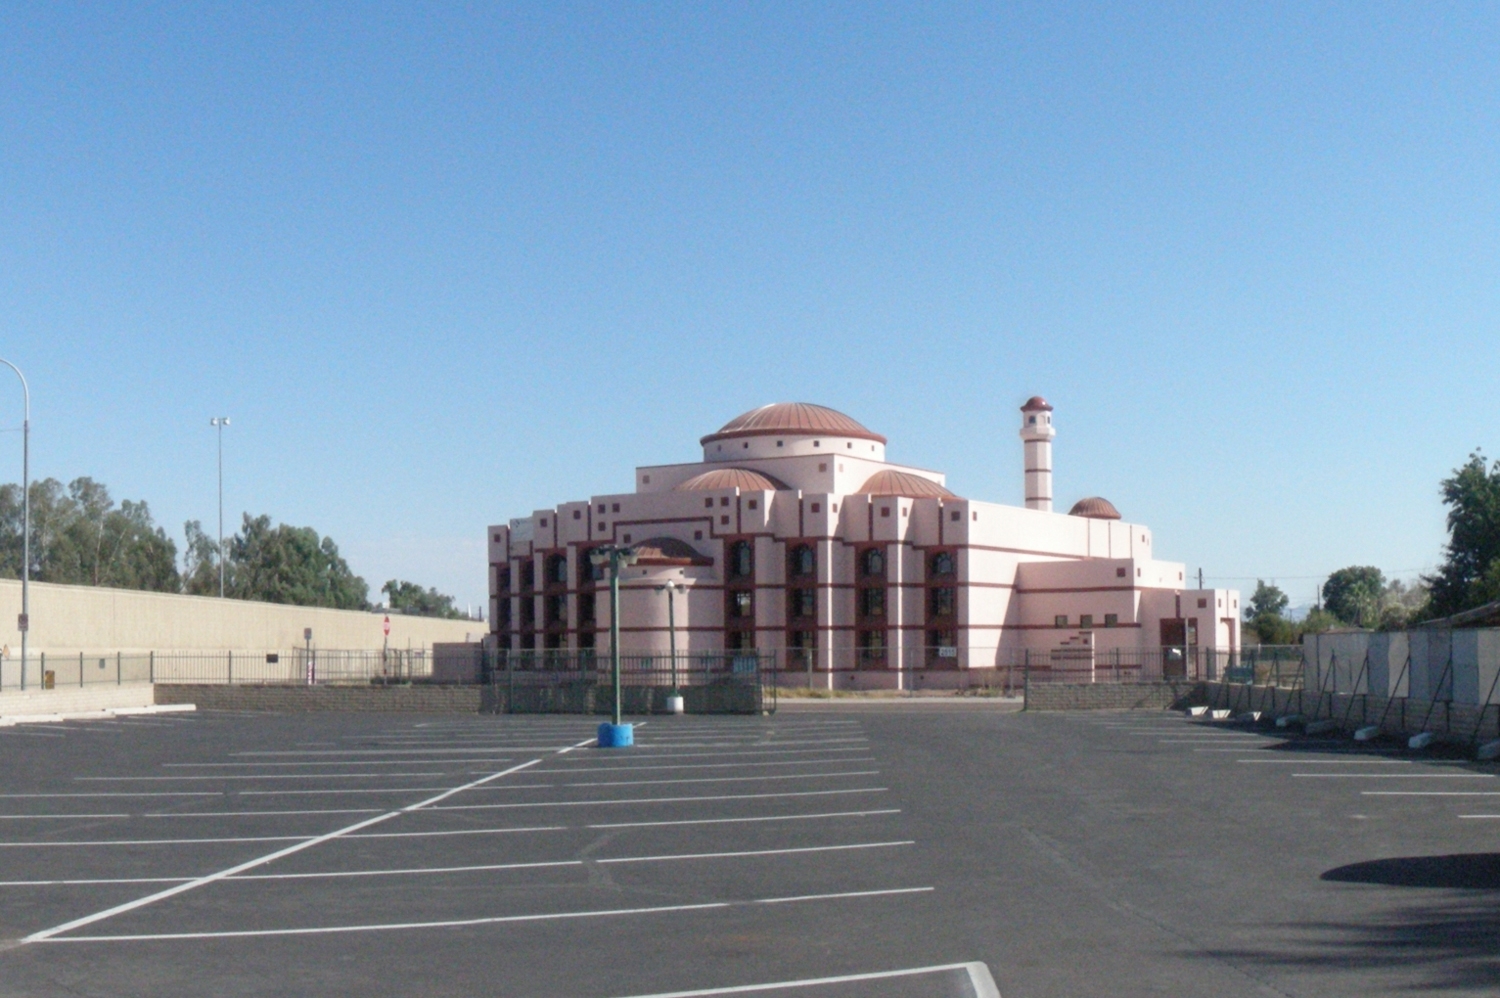 View from parking lot of new mosque building